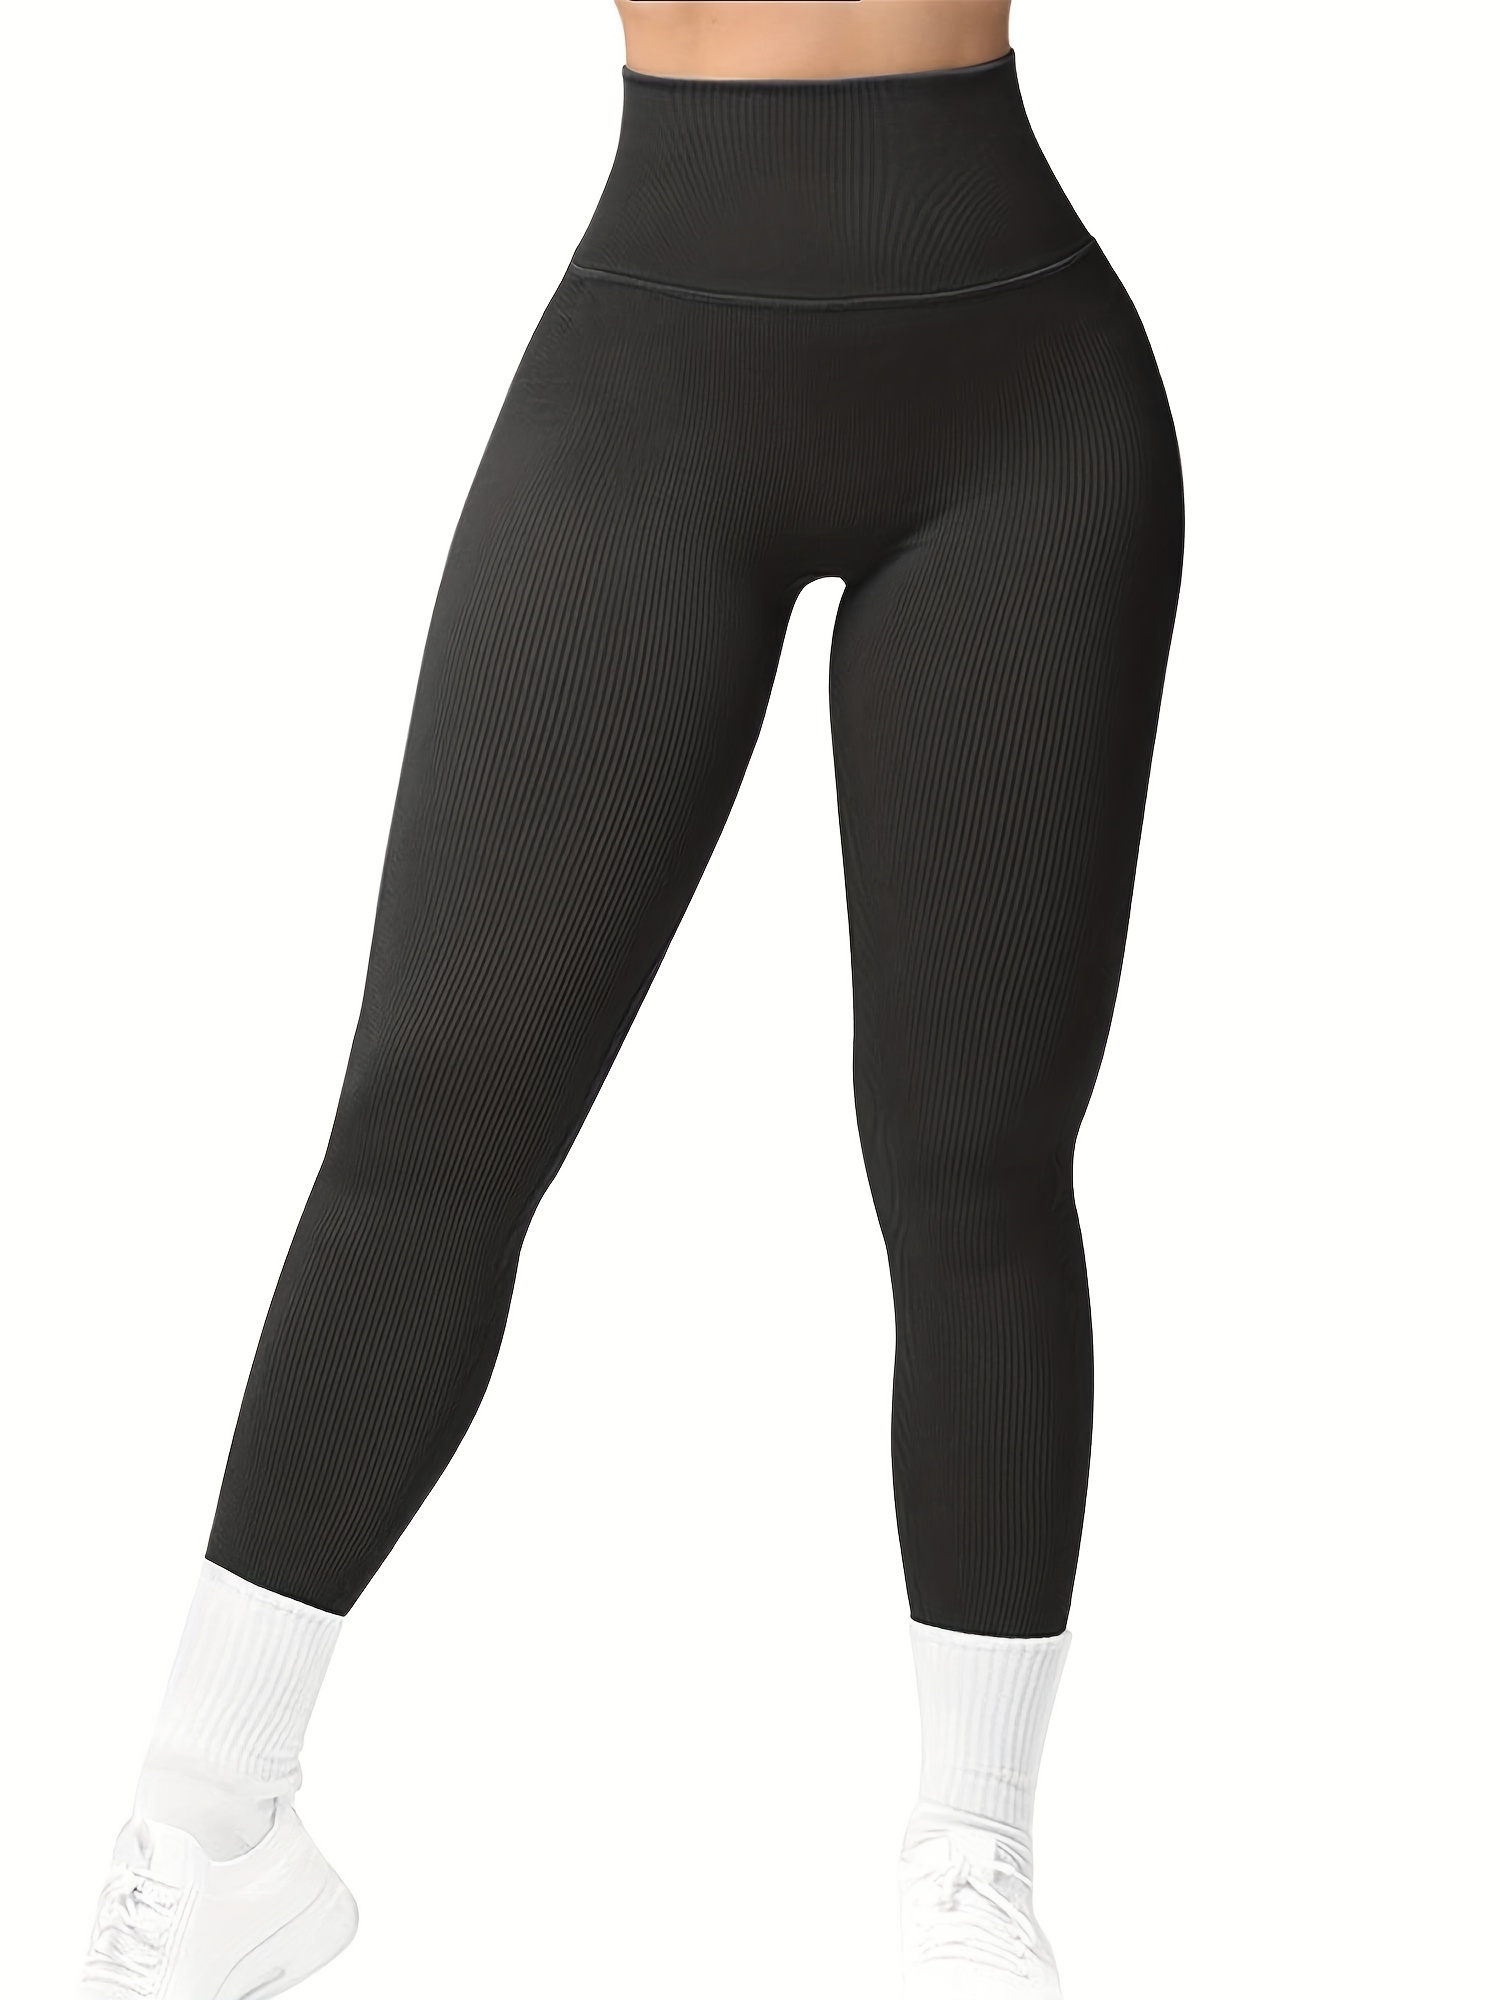 Women's Workout and Running Tights